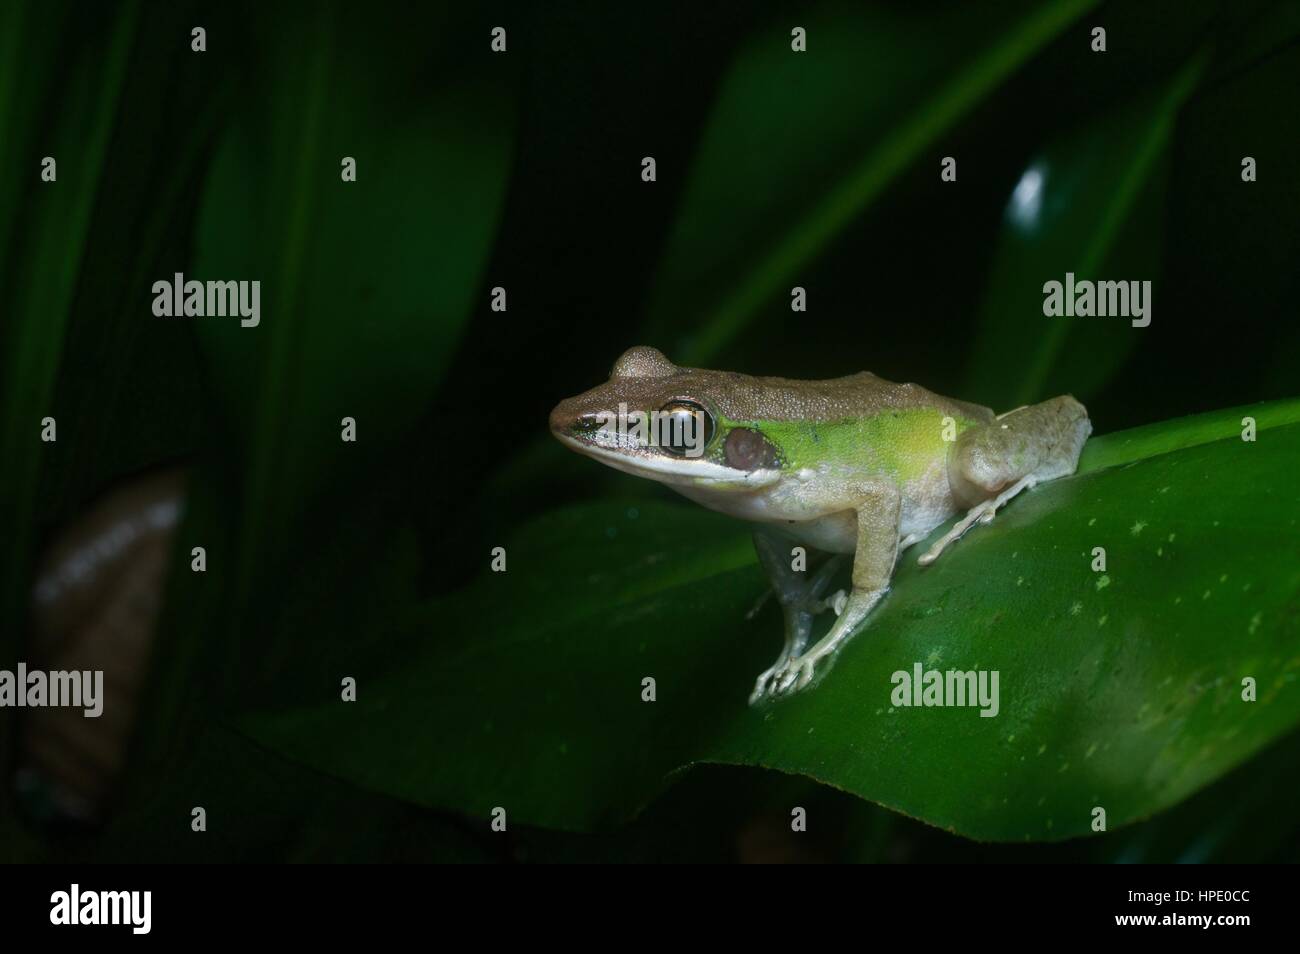 A White-lipped Frog (Chalcorana labialis) on a leaf at night in the rainforest in Ulu Yam, Selangor, Malaysia Stock Photo